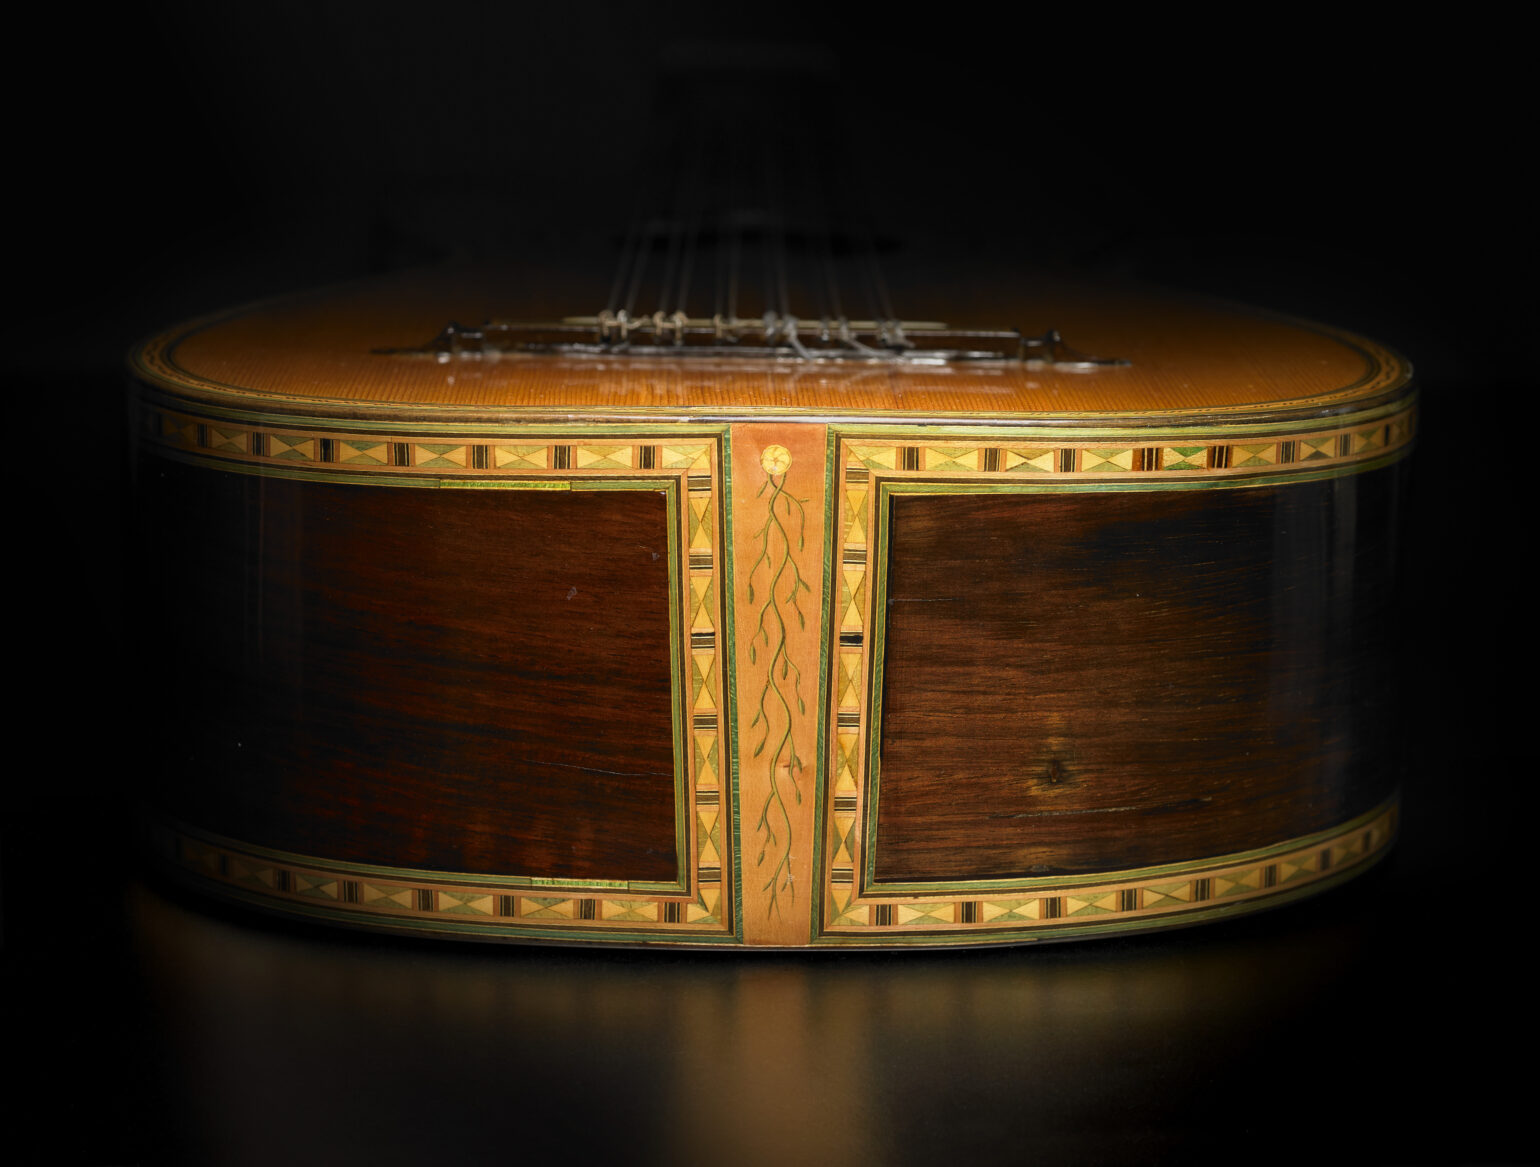 Jeff Wells collection, bottom of the 1812 Furnielas guitar, Photo: Courtesy of Jeff Wells